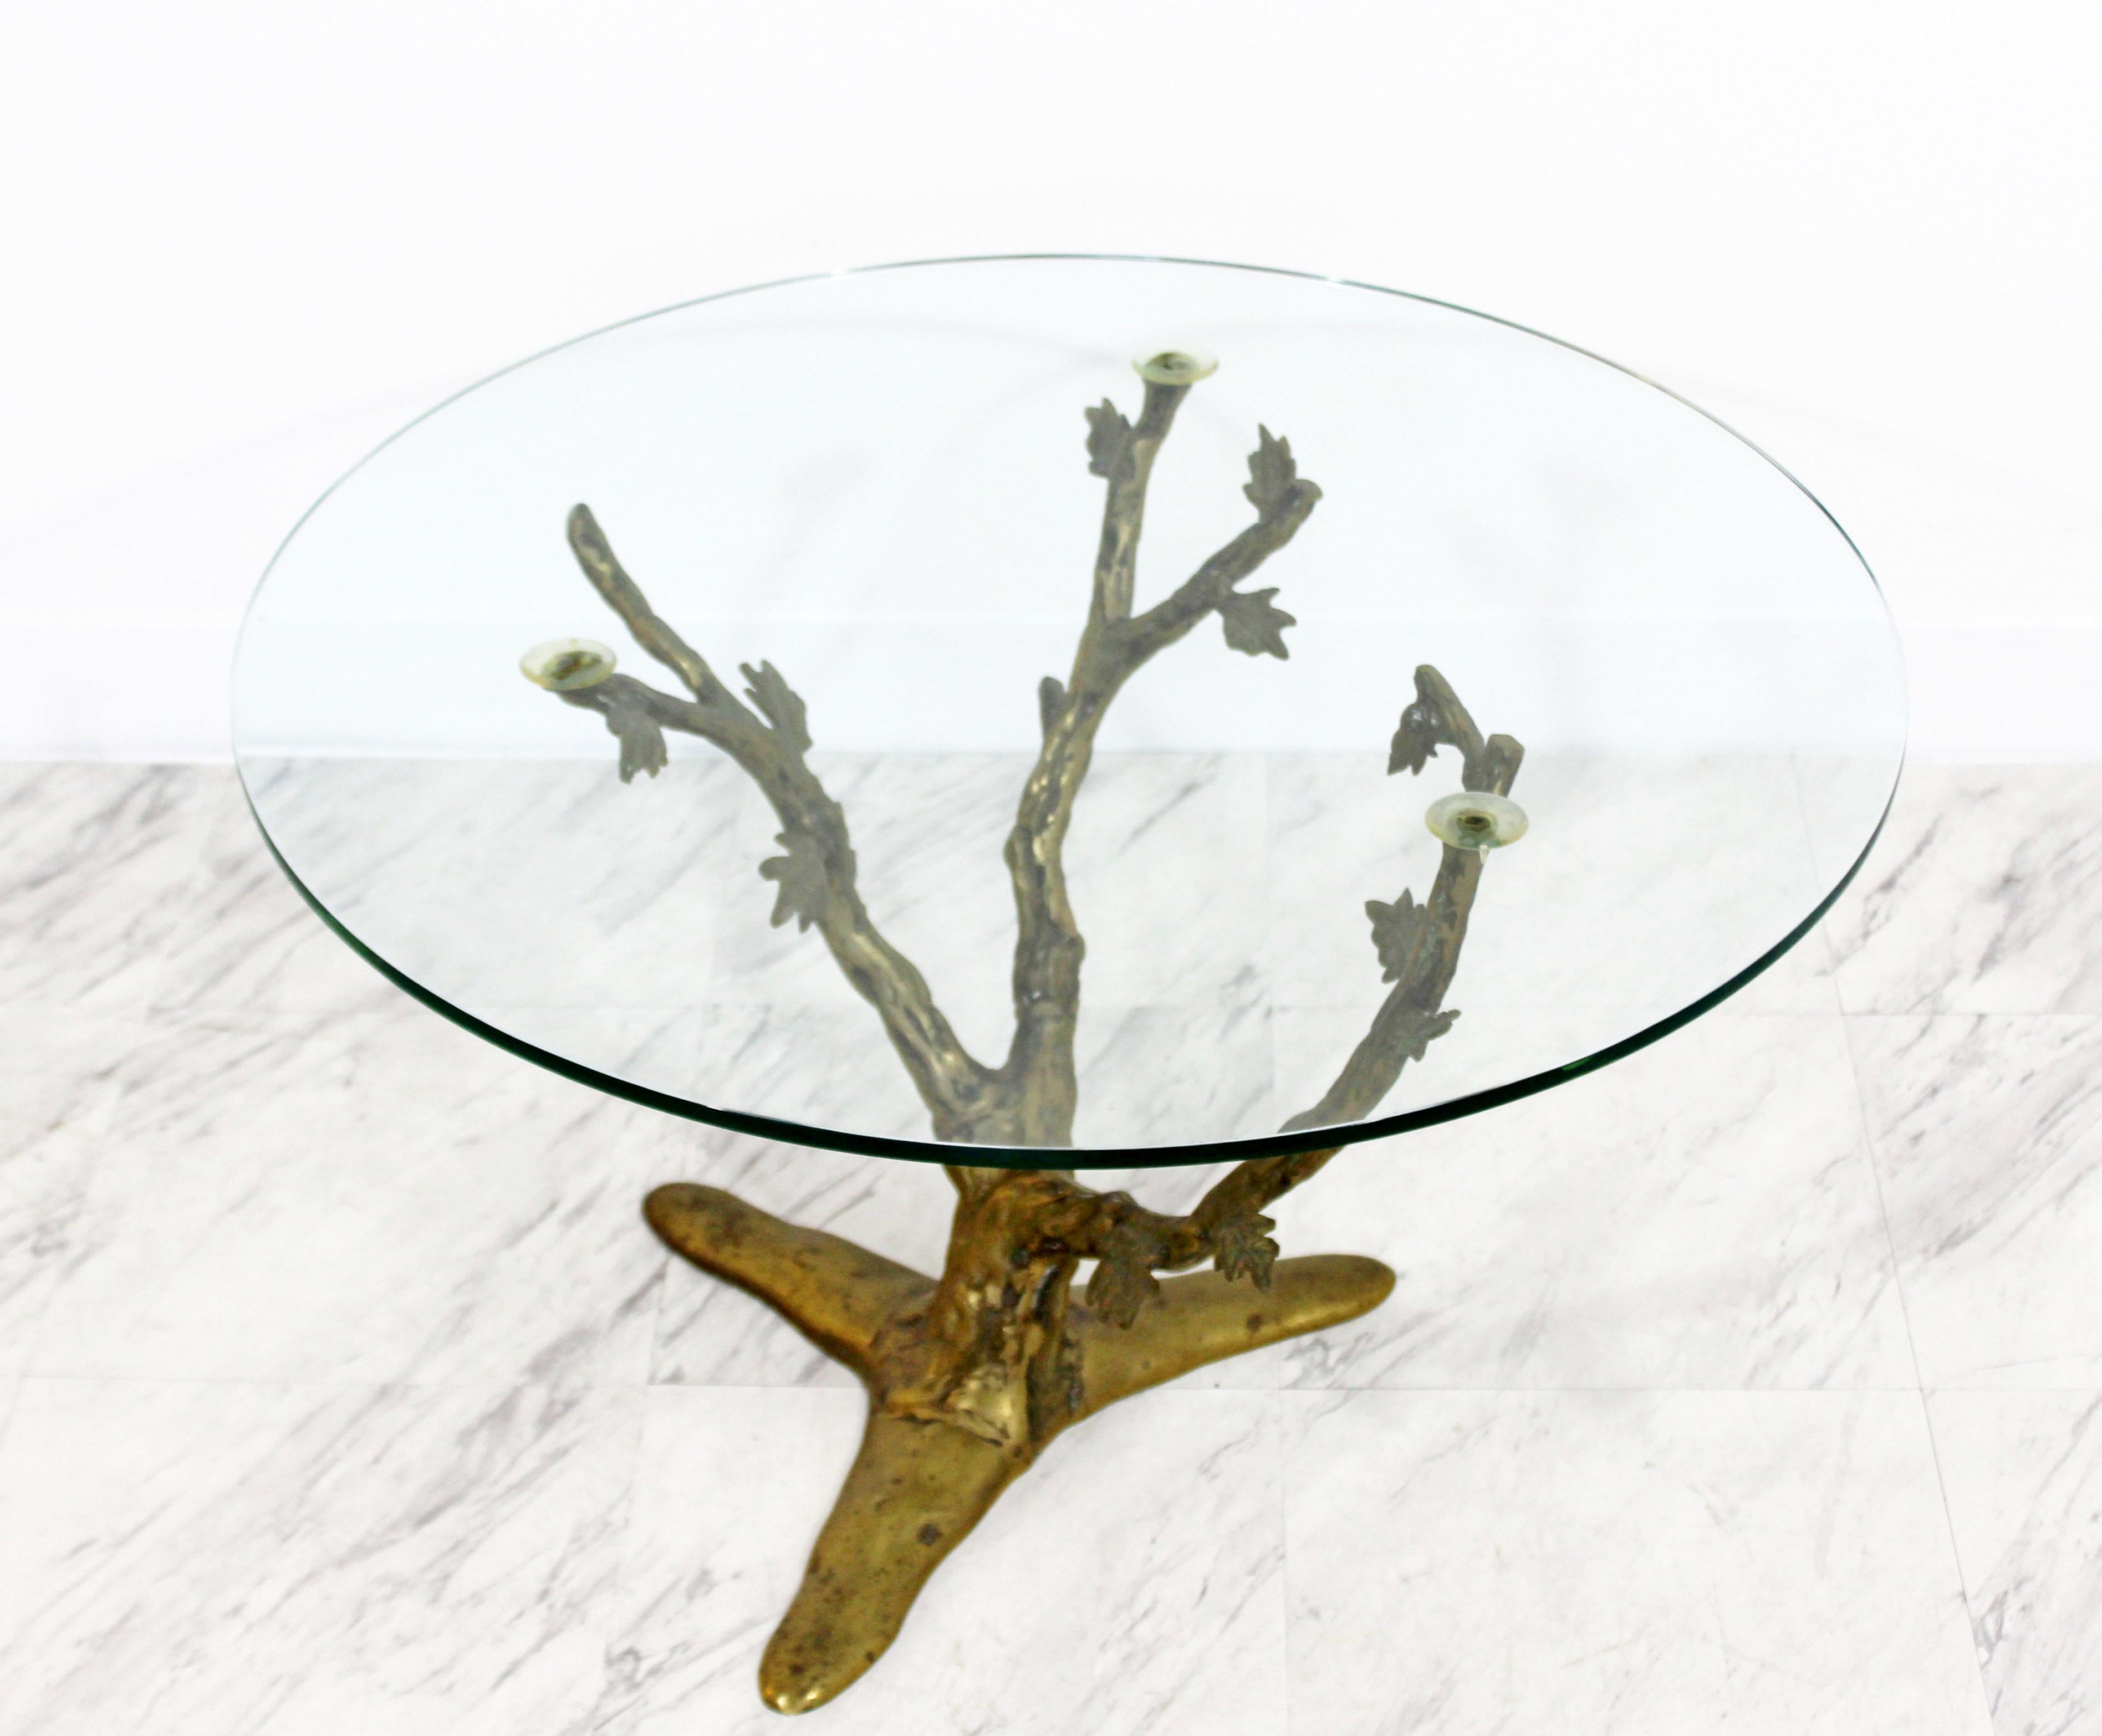 For your consideration is a fantastic cast bronze side or end table, with a three limb branch base, and a round glass top. In excellent condition. Attributed to Jacques Duval Brasseur. The dimensions are 28